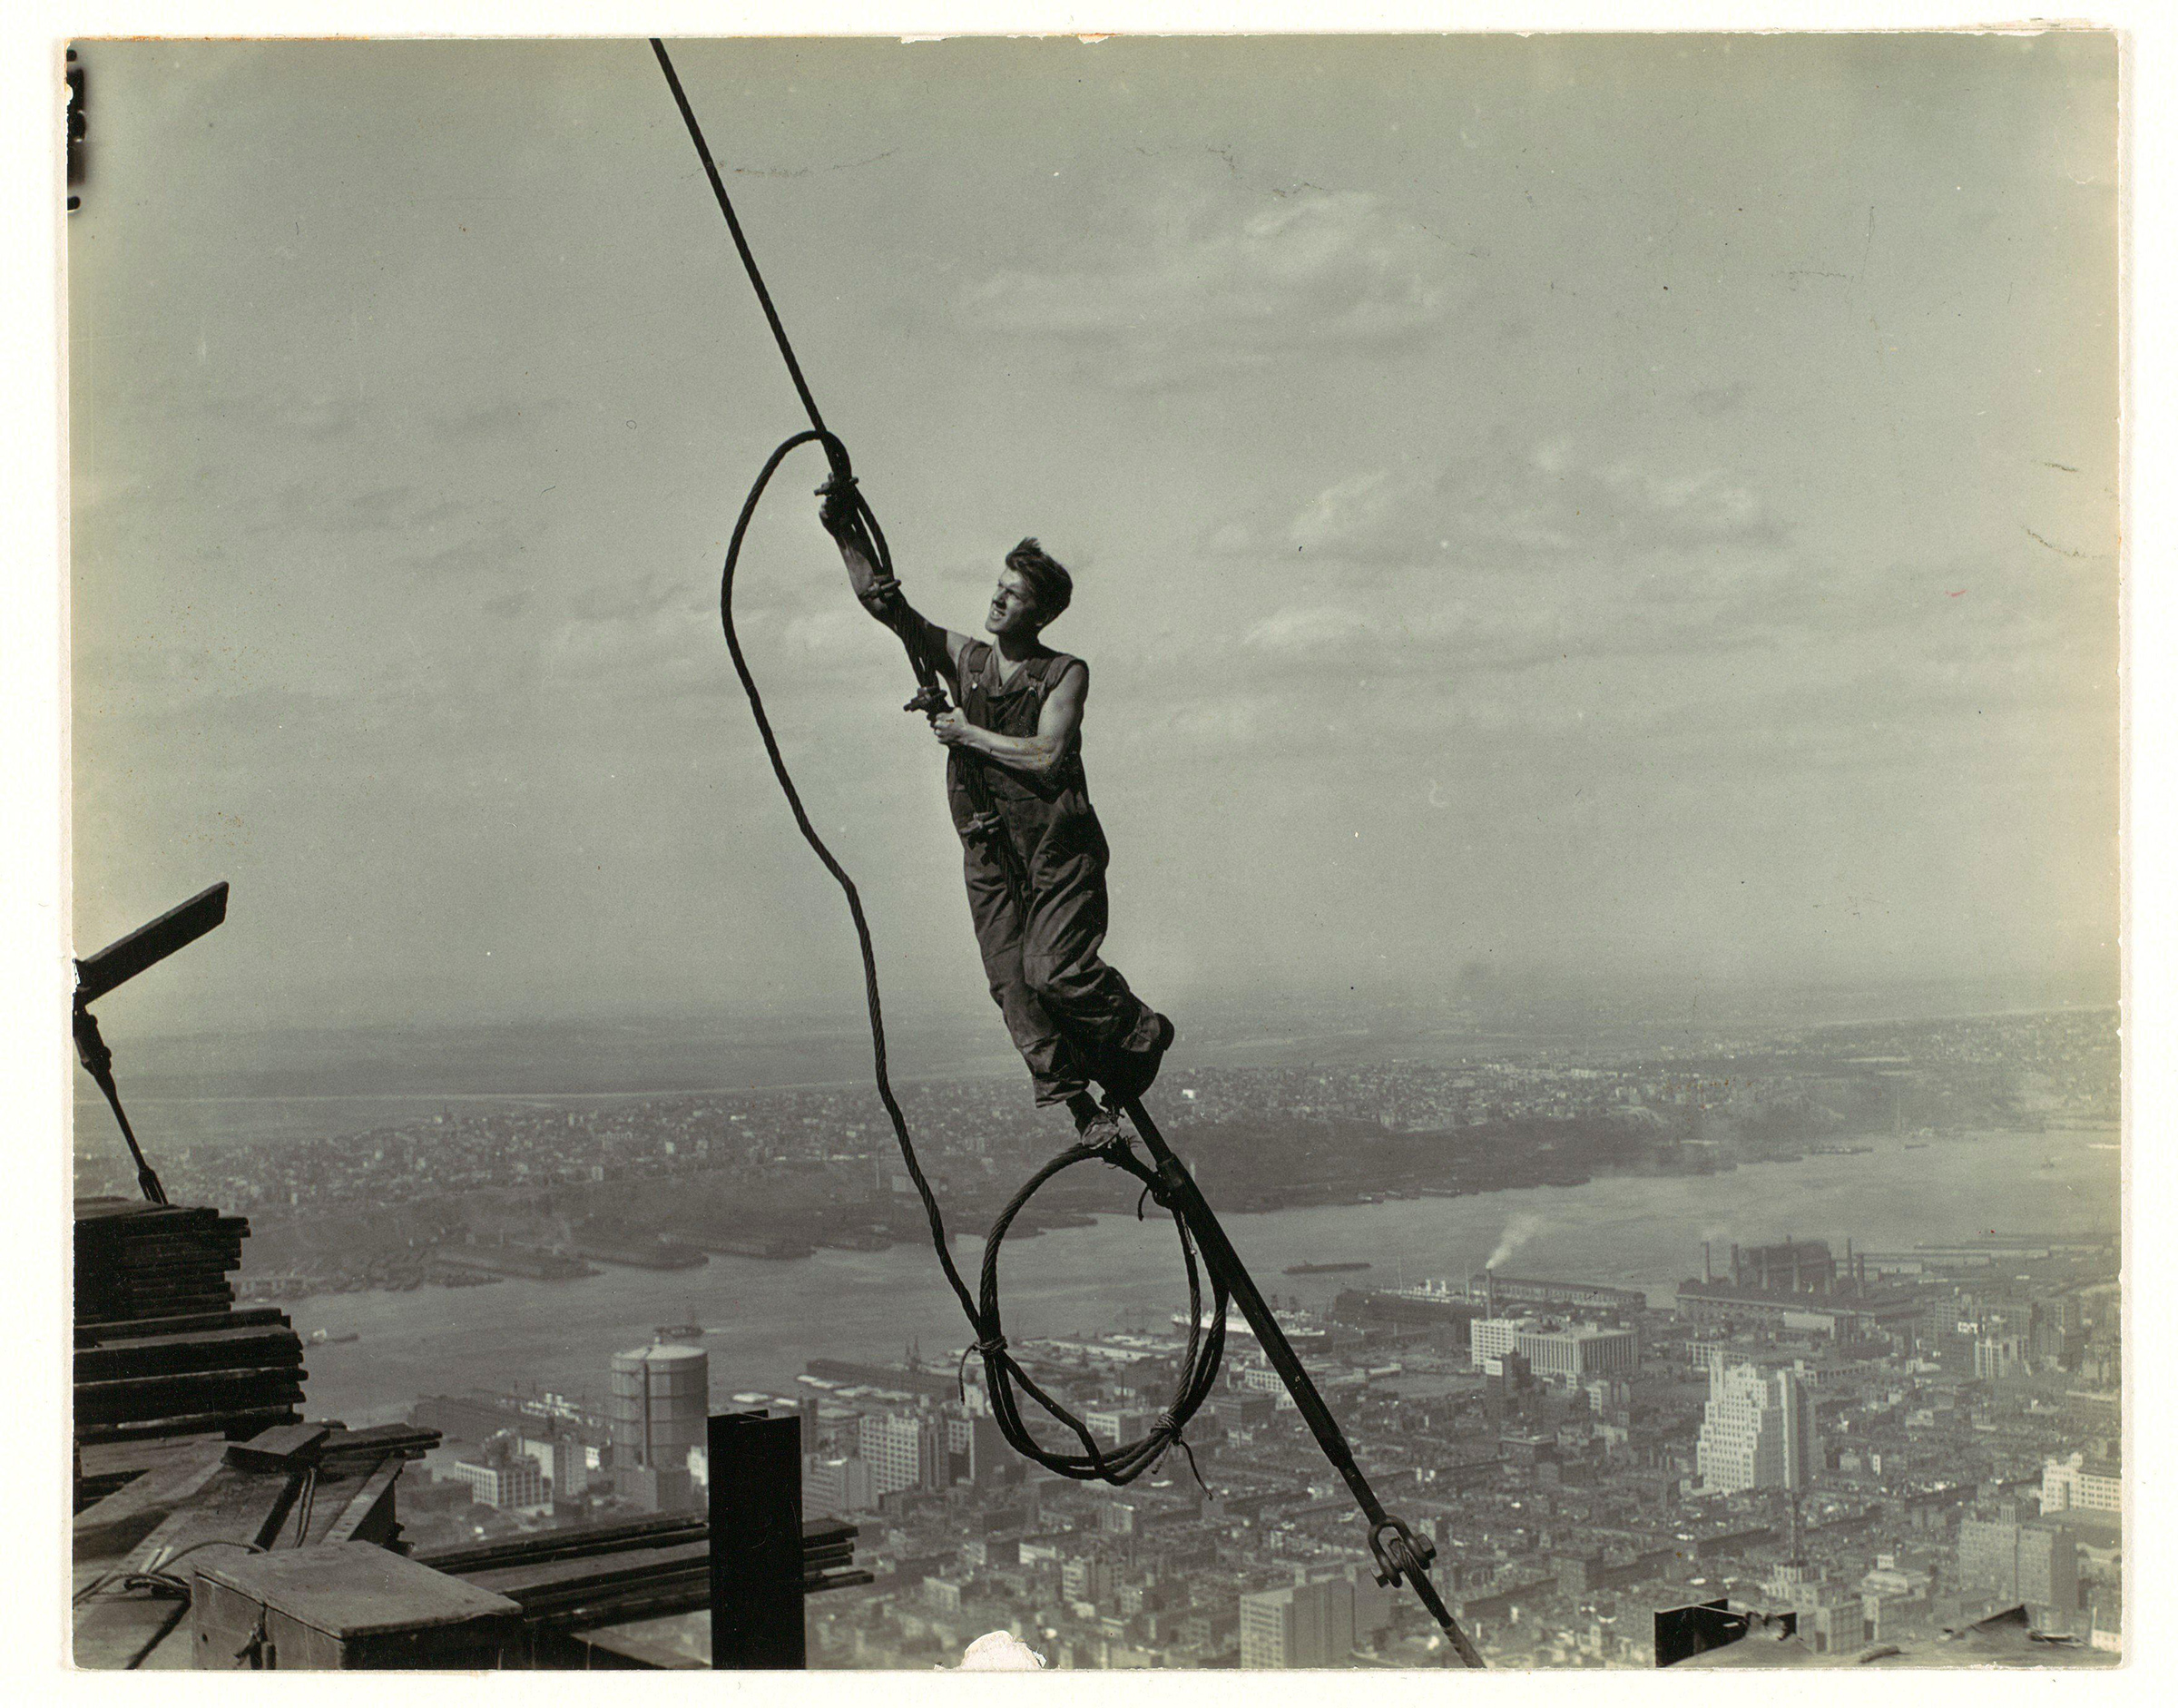 High up on the Empire State Building, 1930